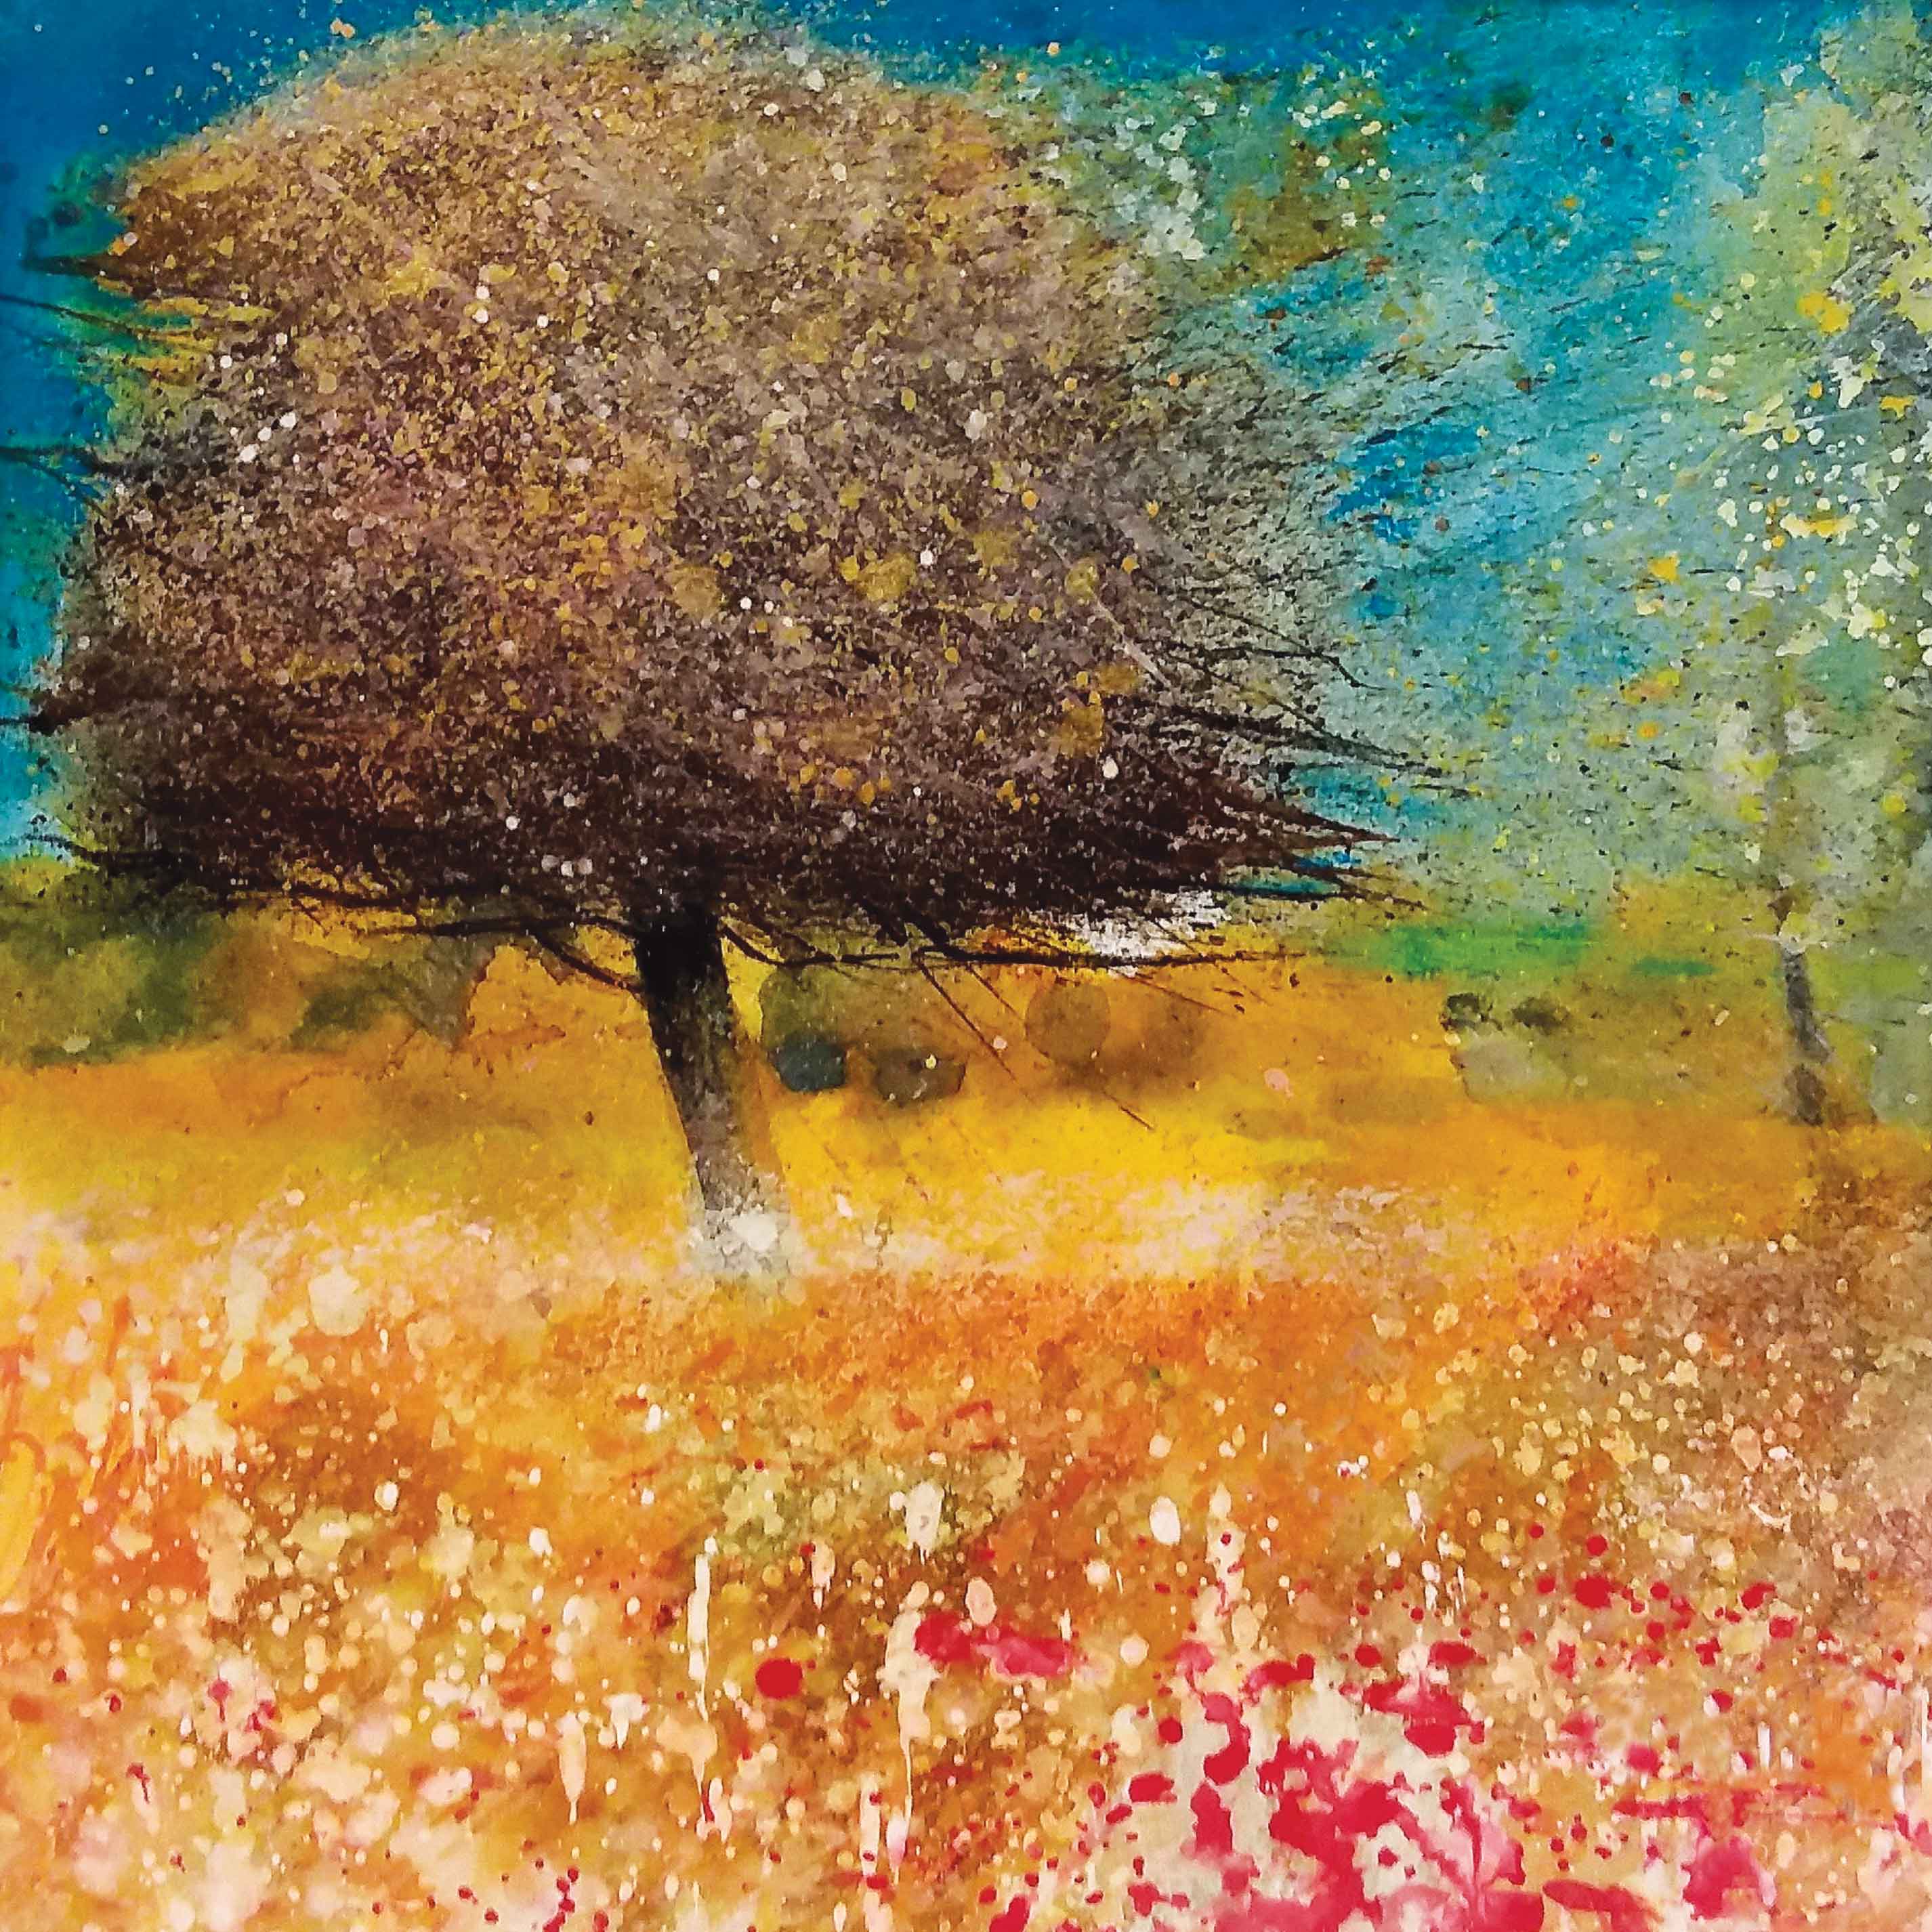 Art Greeting Card by Sue Howells, watercolour, tree in meadow